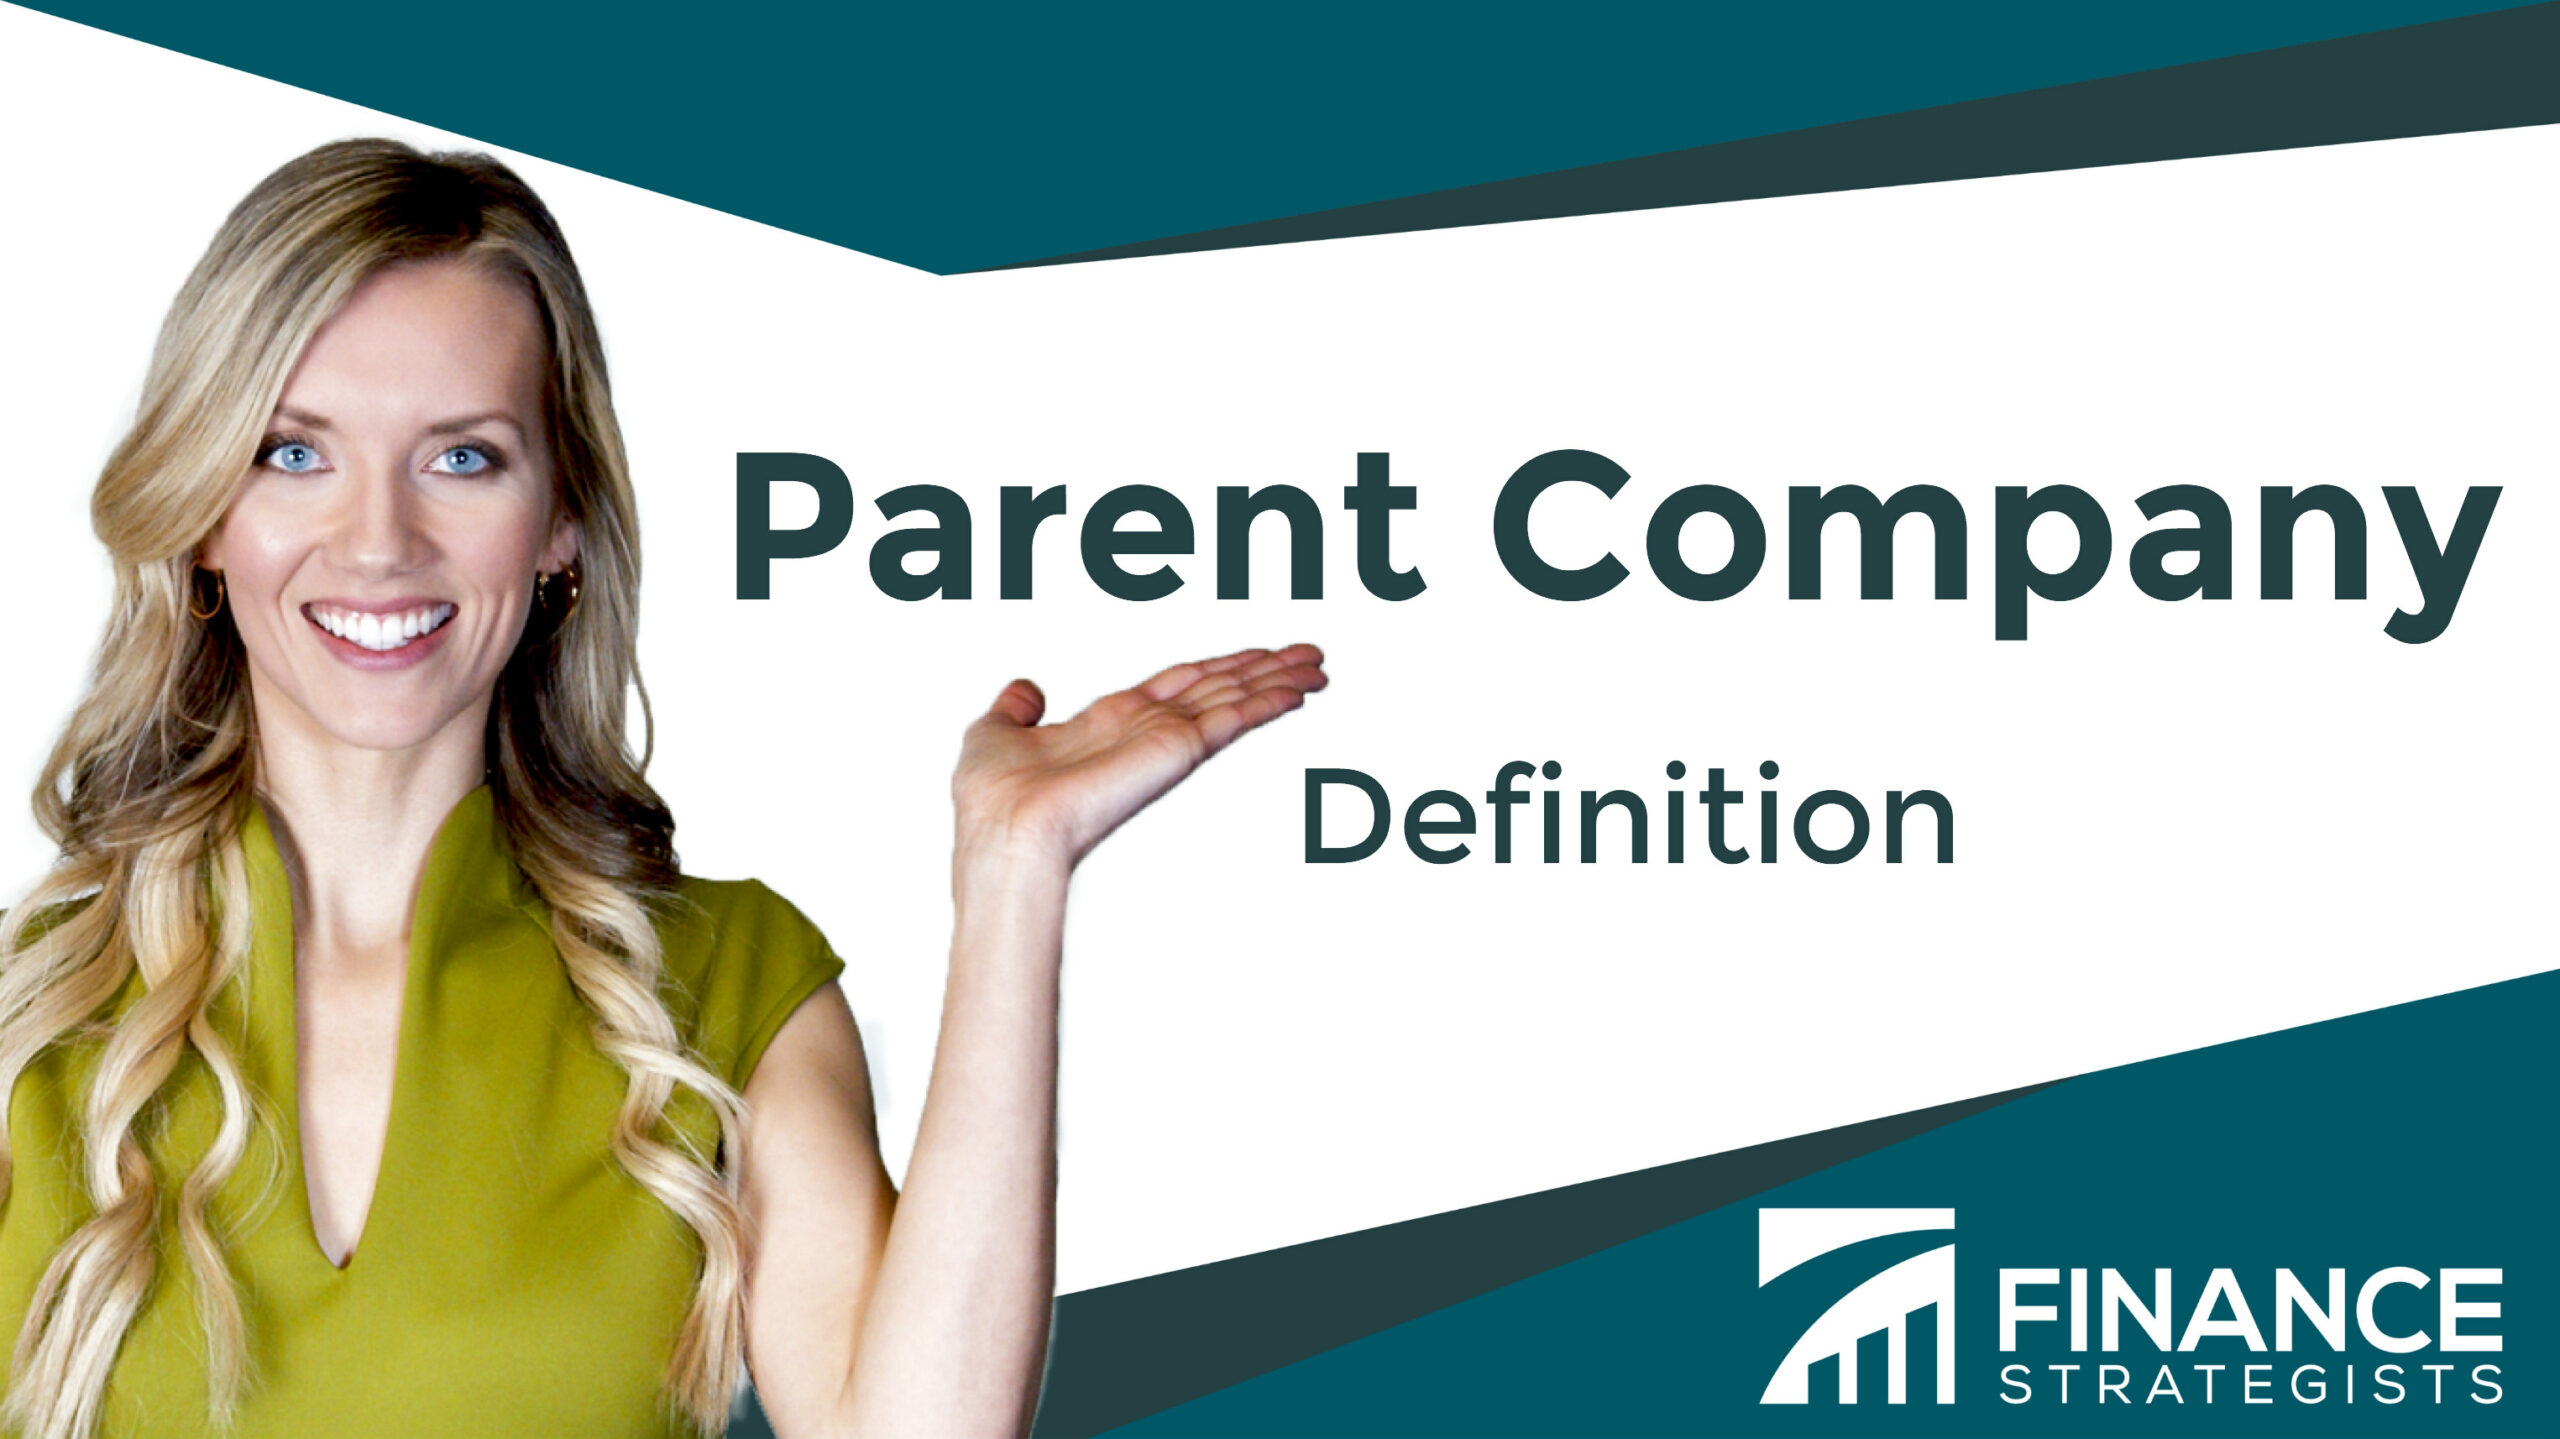 What Is a Parent Company? - Definition | Finance Strategists